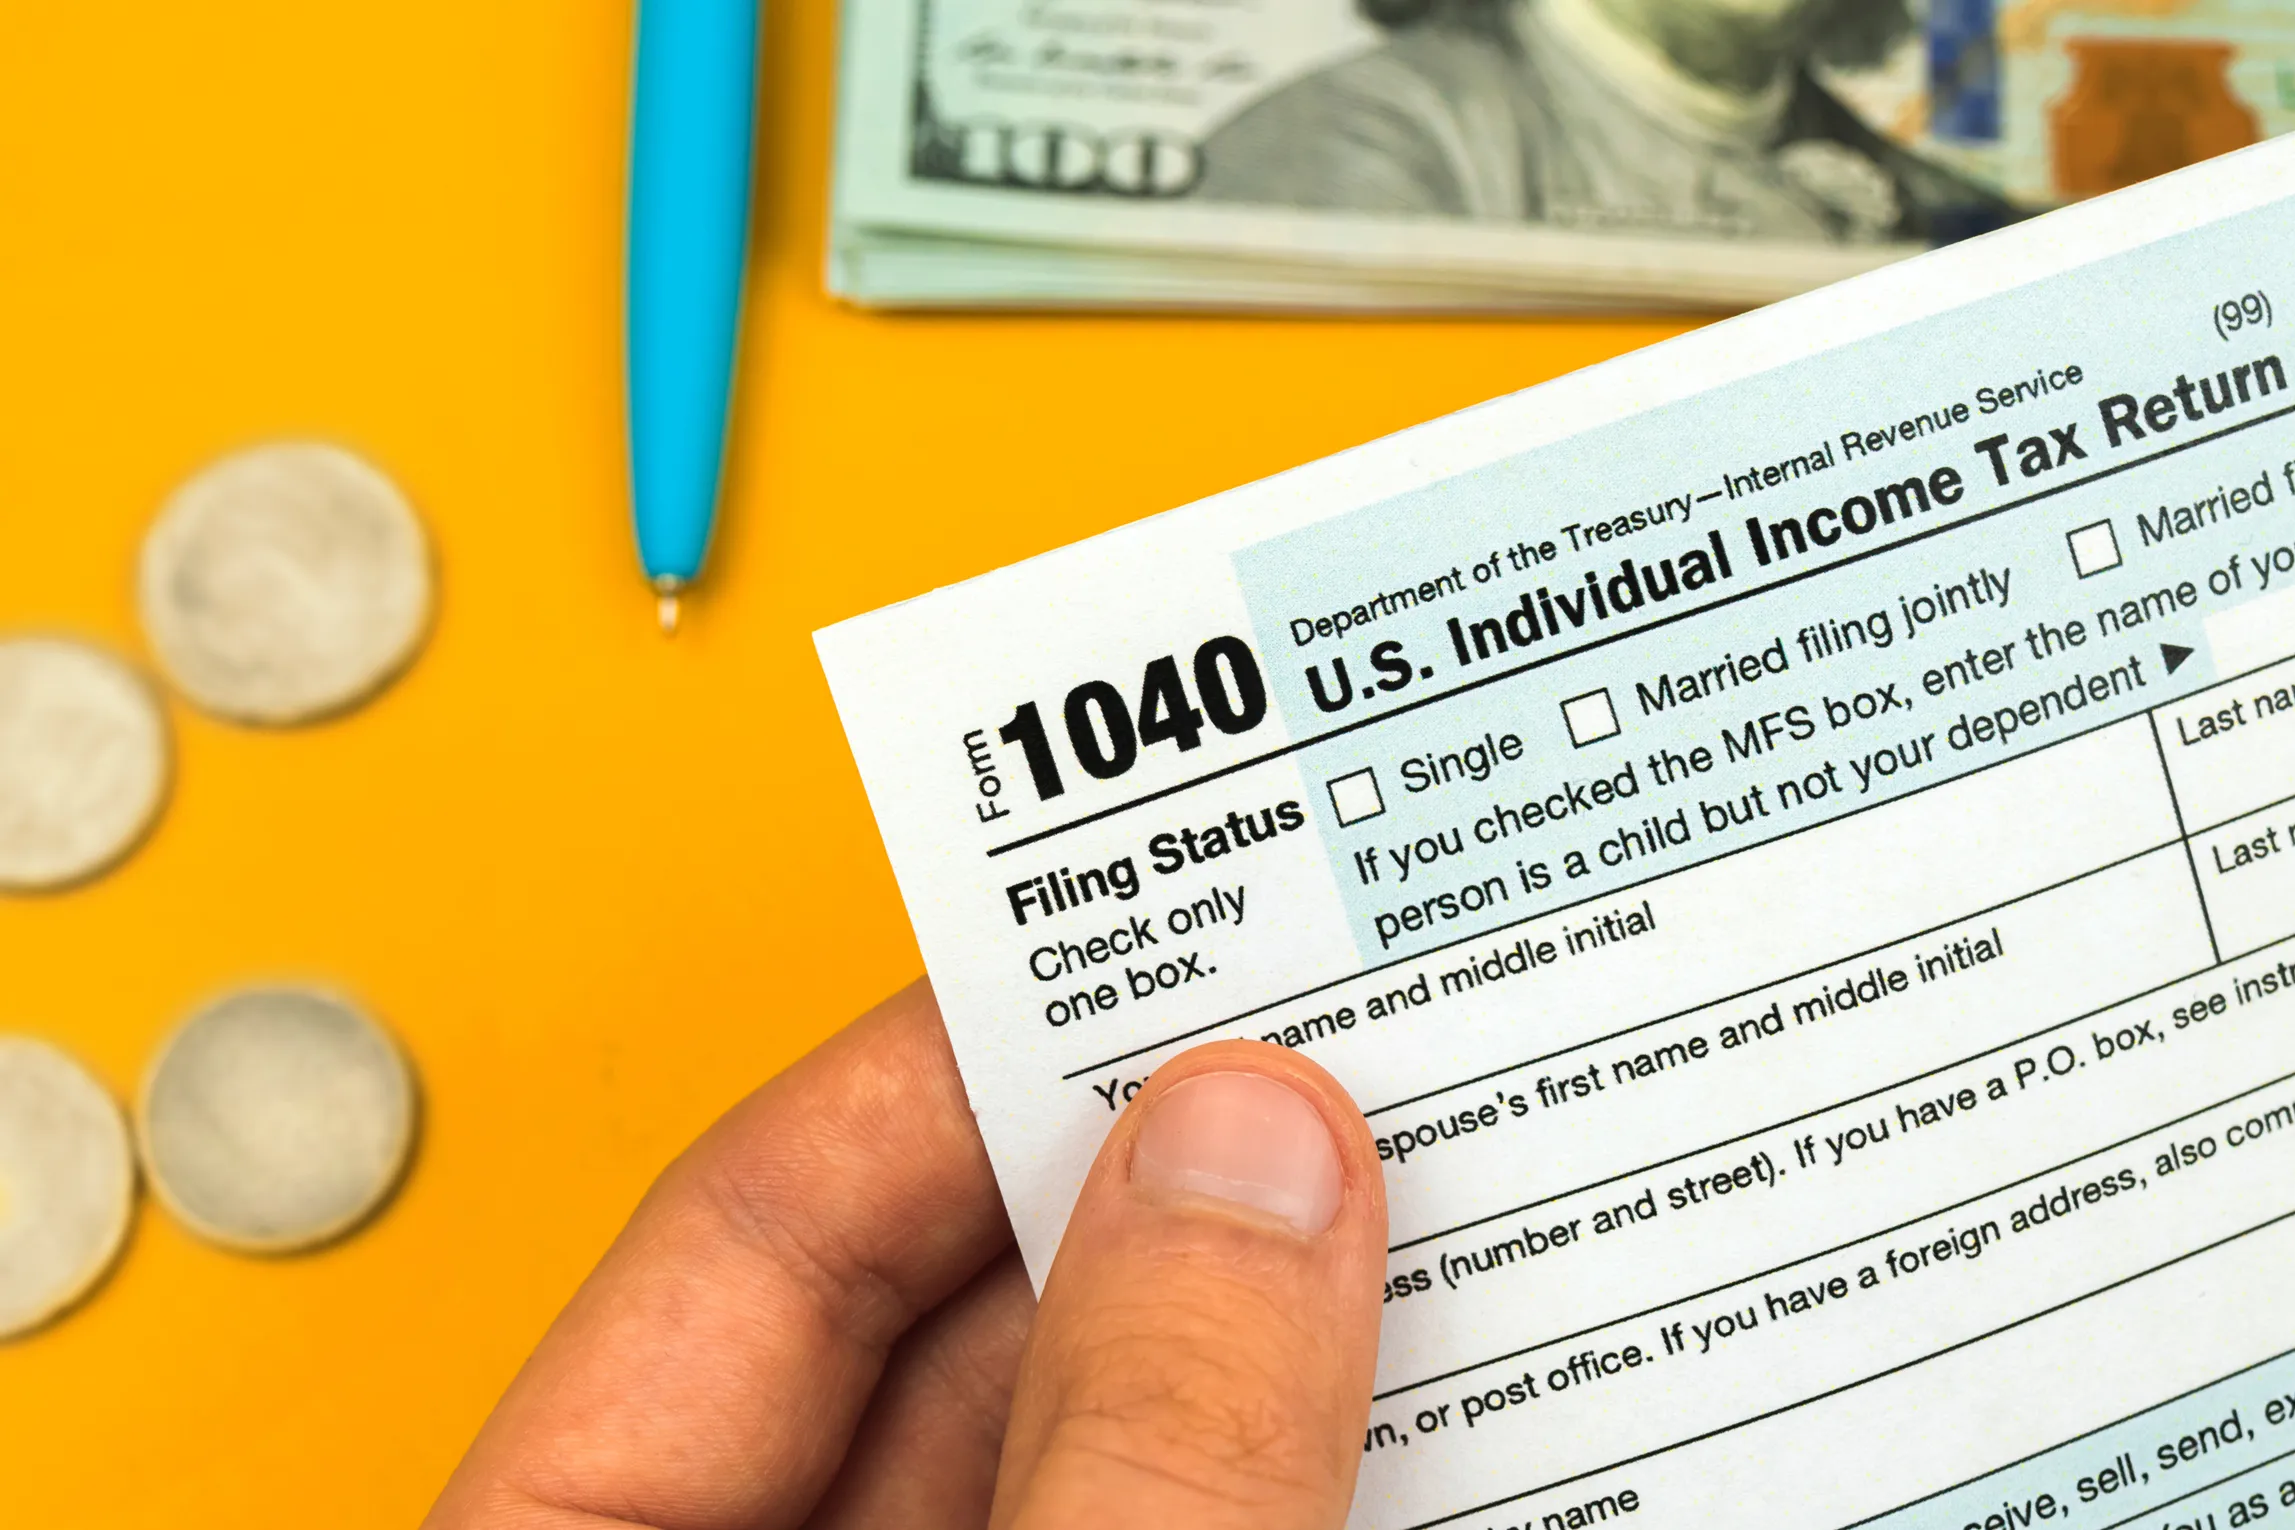 irs-will-issue-special-tax-refunds-to-some-unemployed-money